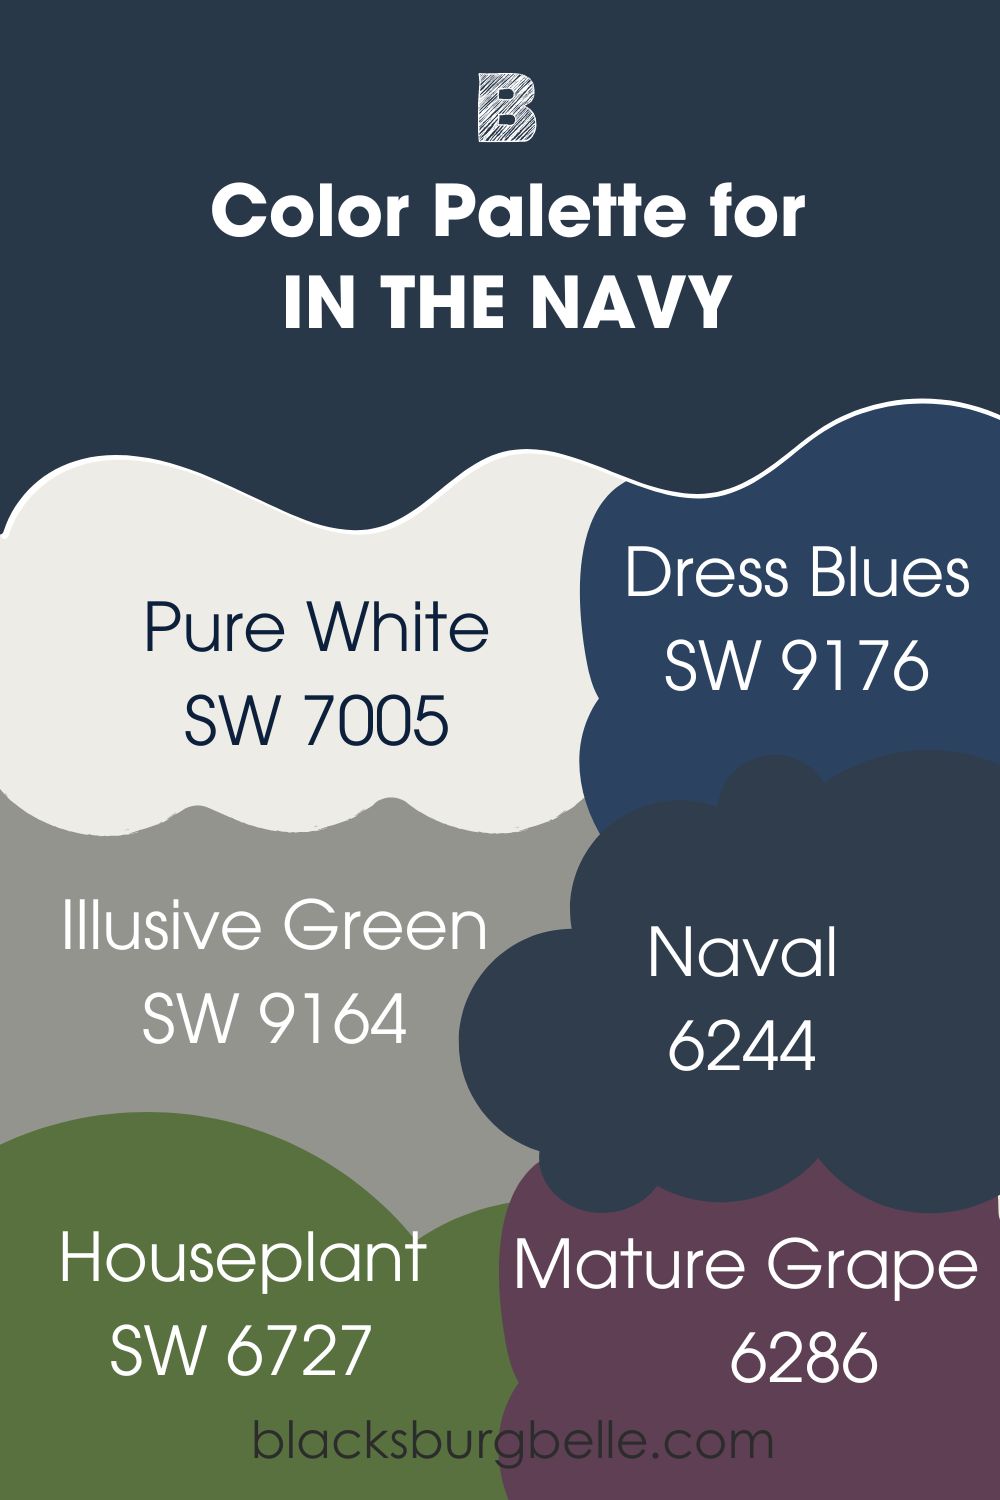 IN THE NAVY Color Palette